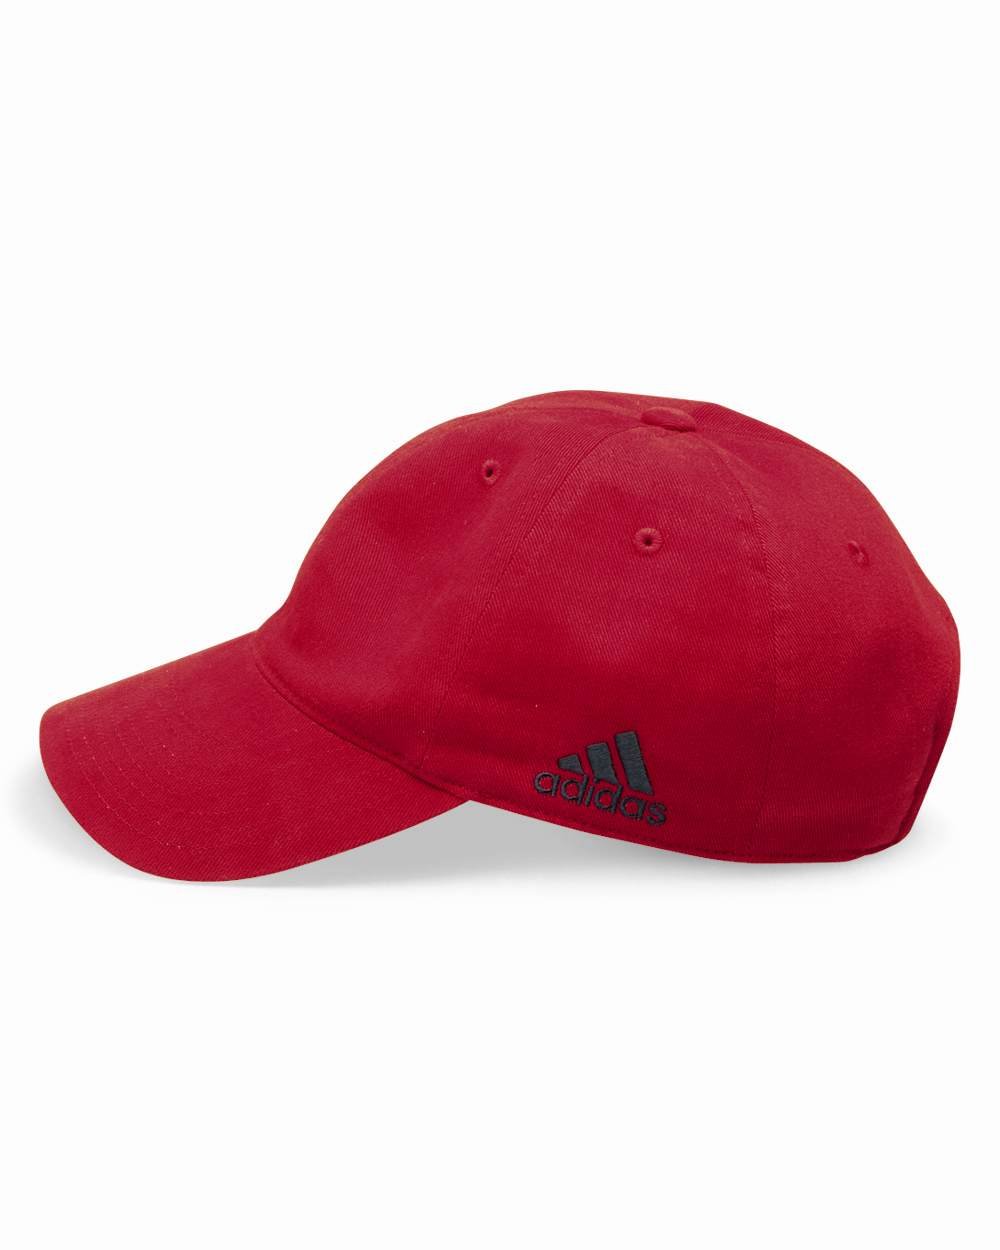 Adidas - Unstructured Cresting Cap - A12